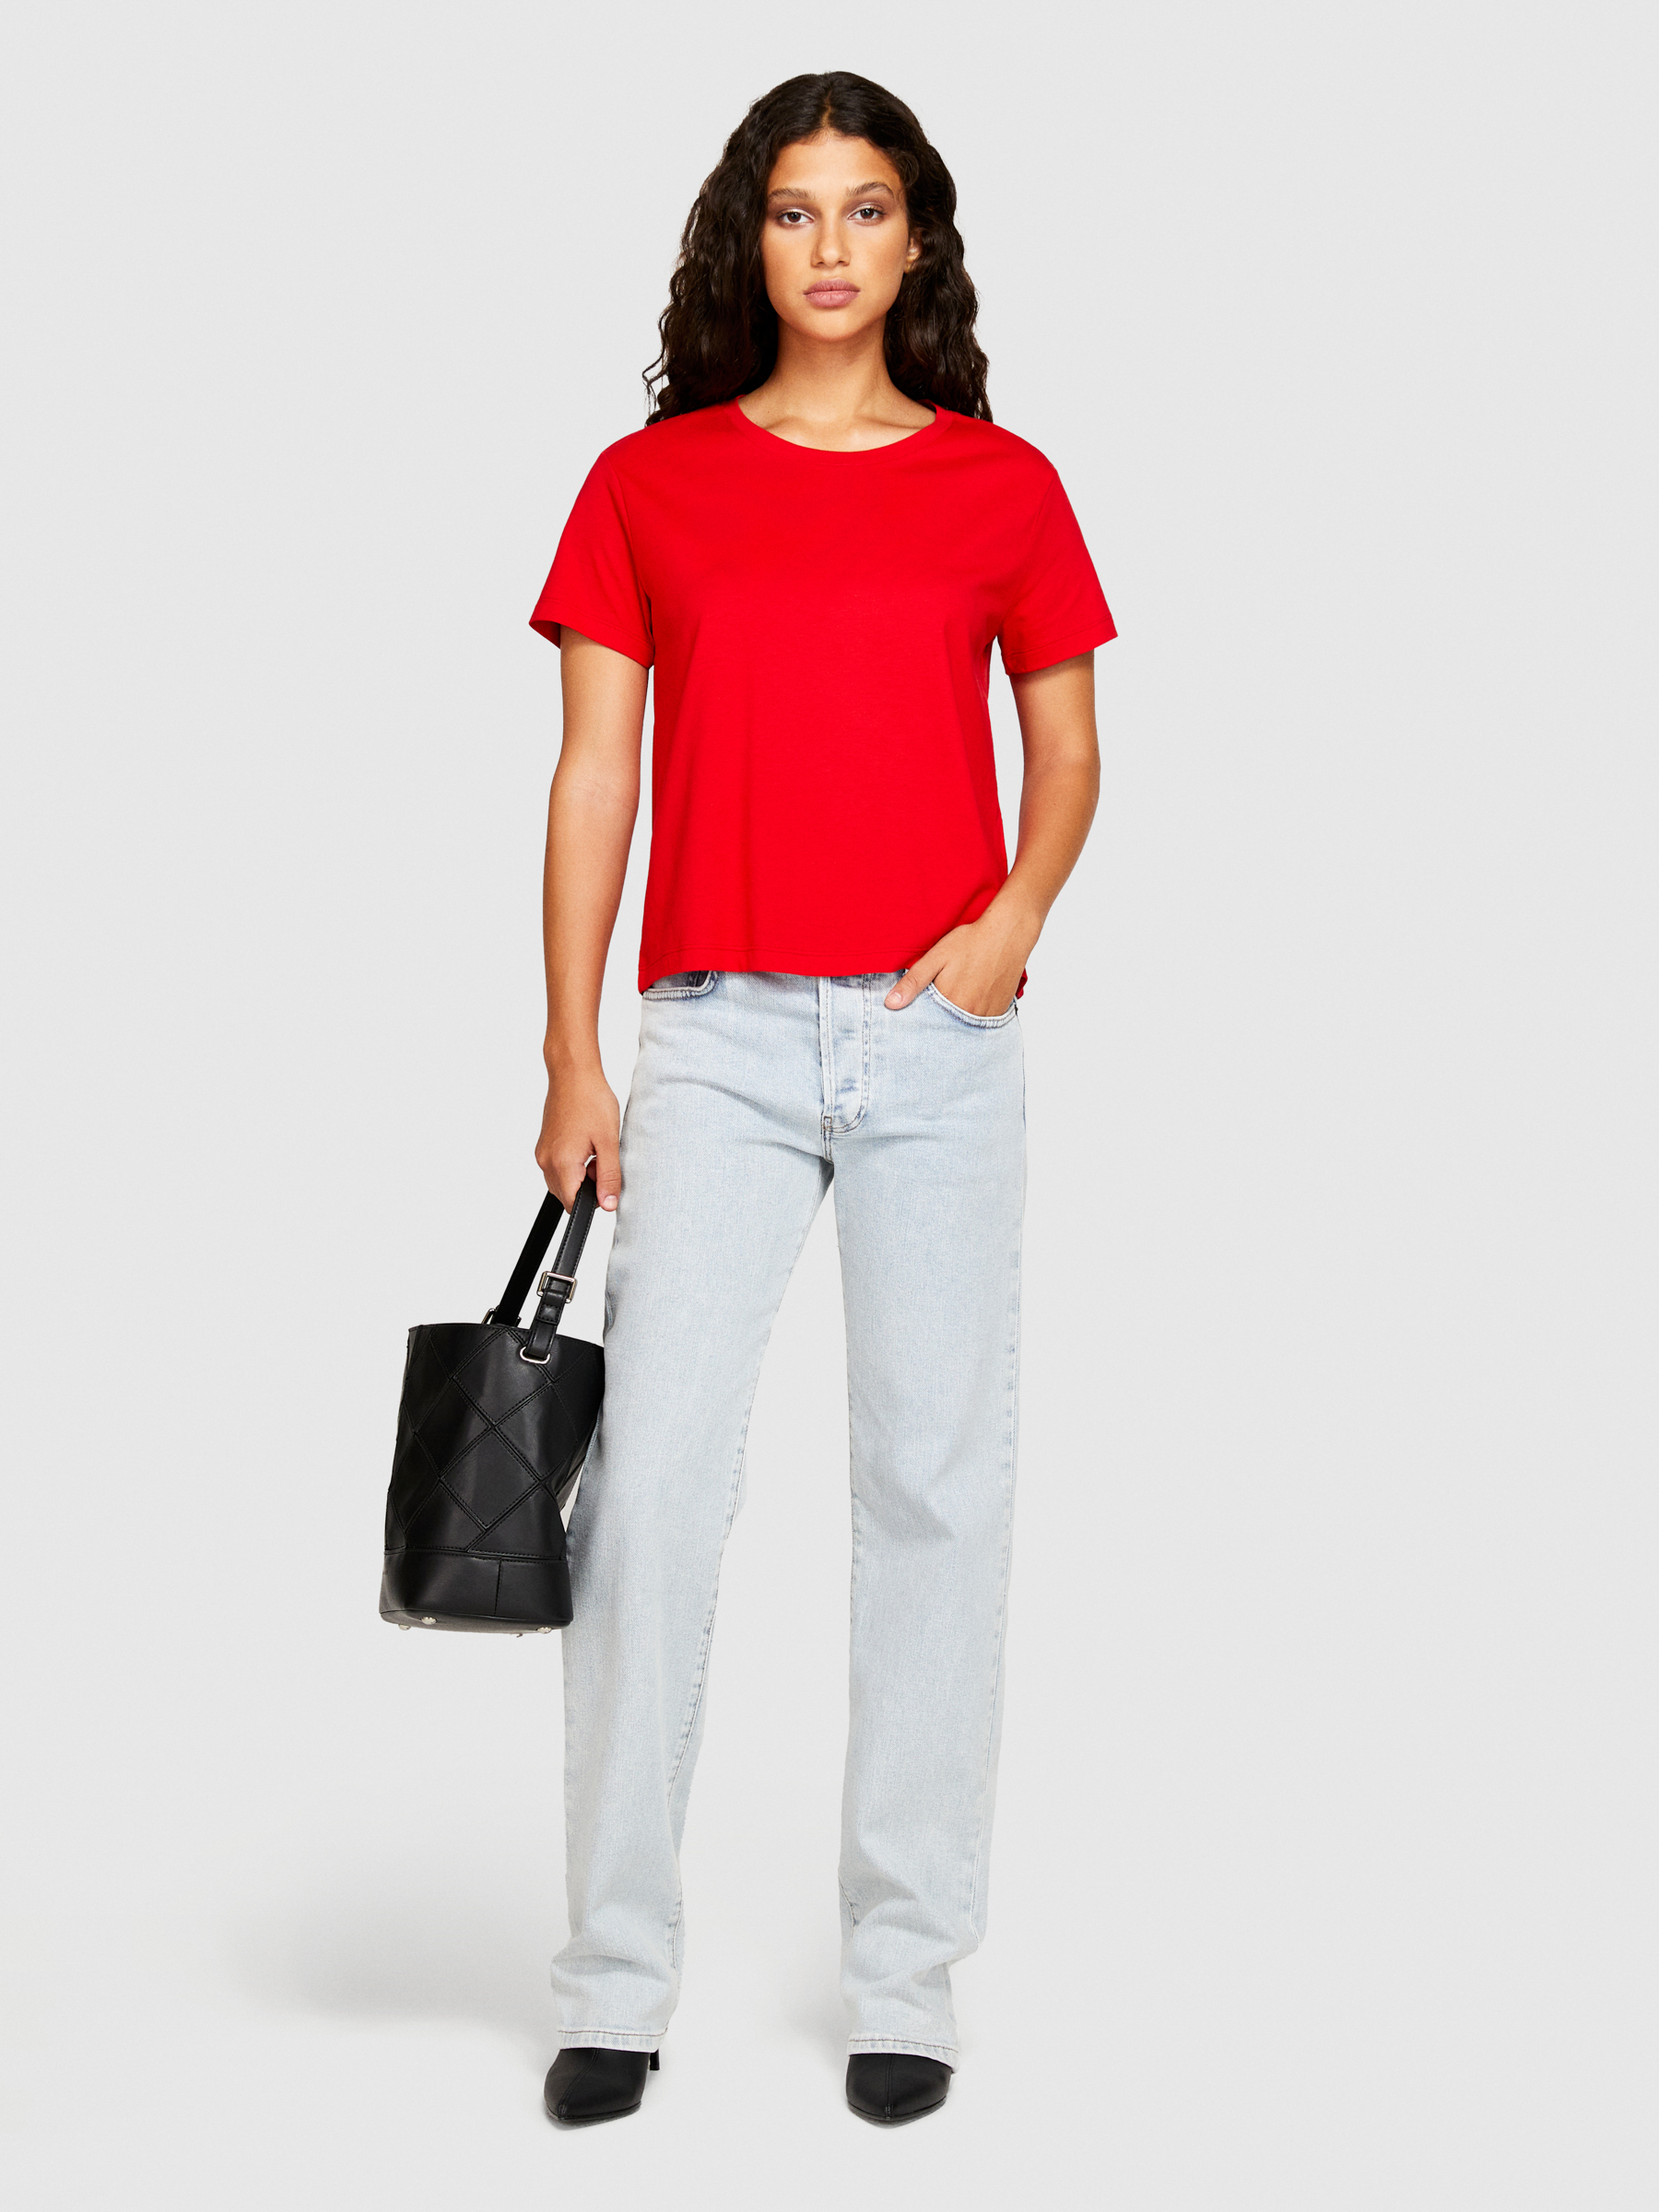 Sisley - Solid Color Boxy Fit T-shirt, Woman, Red, Size: XS